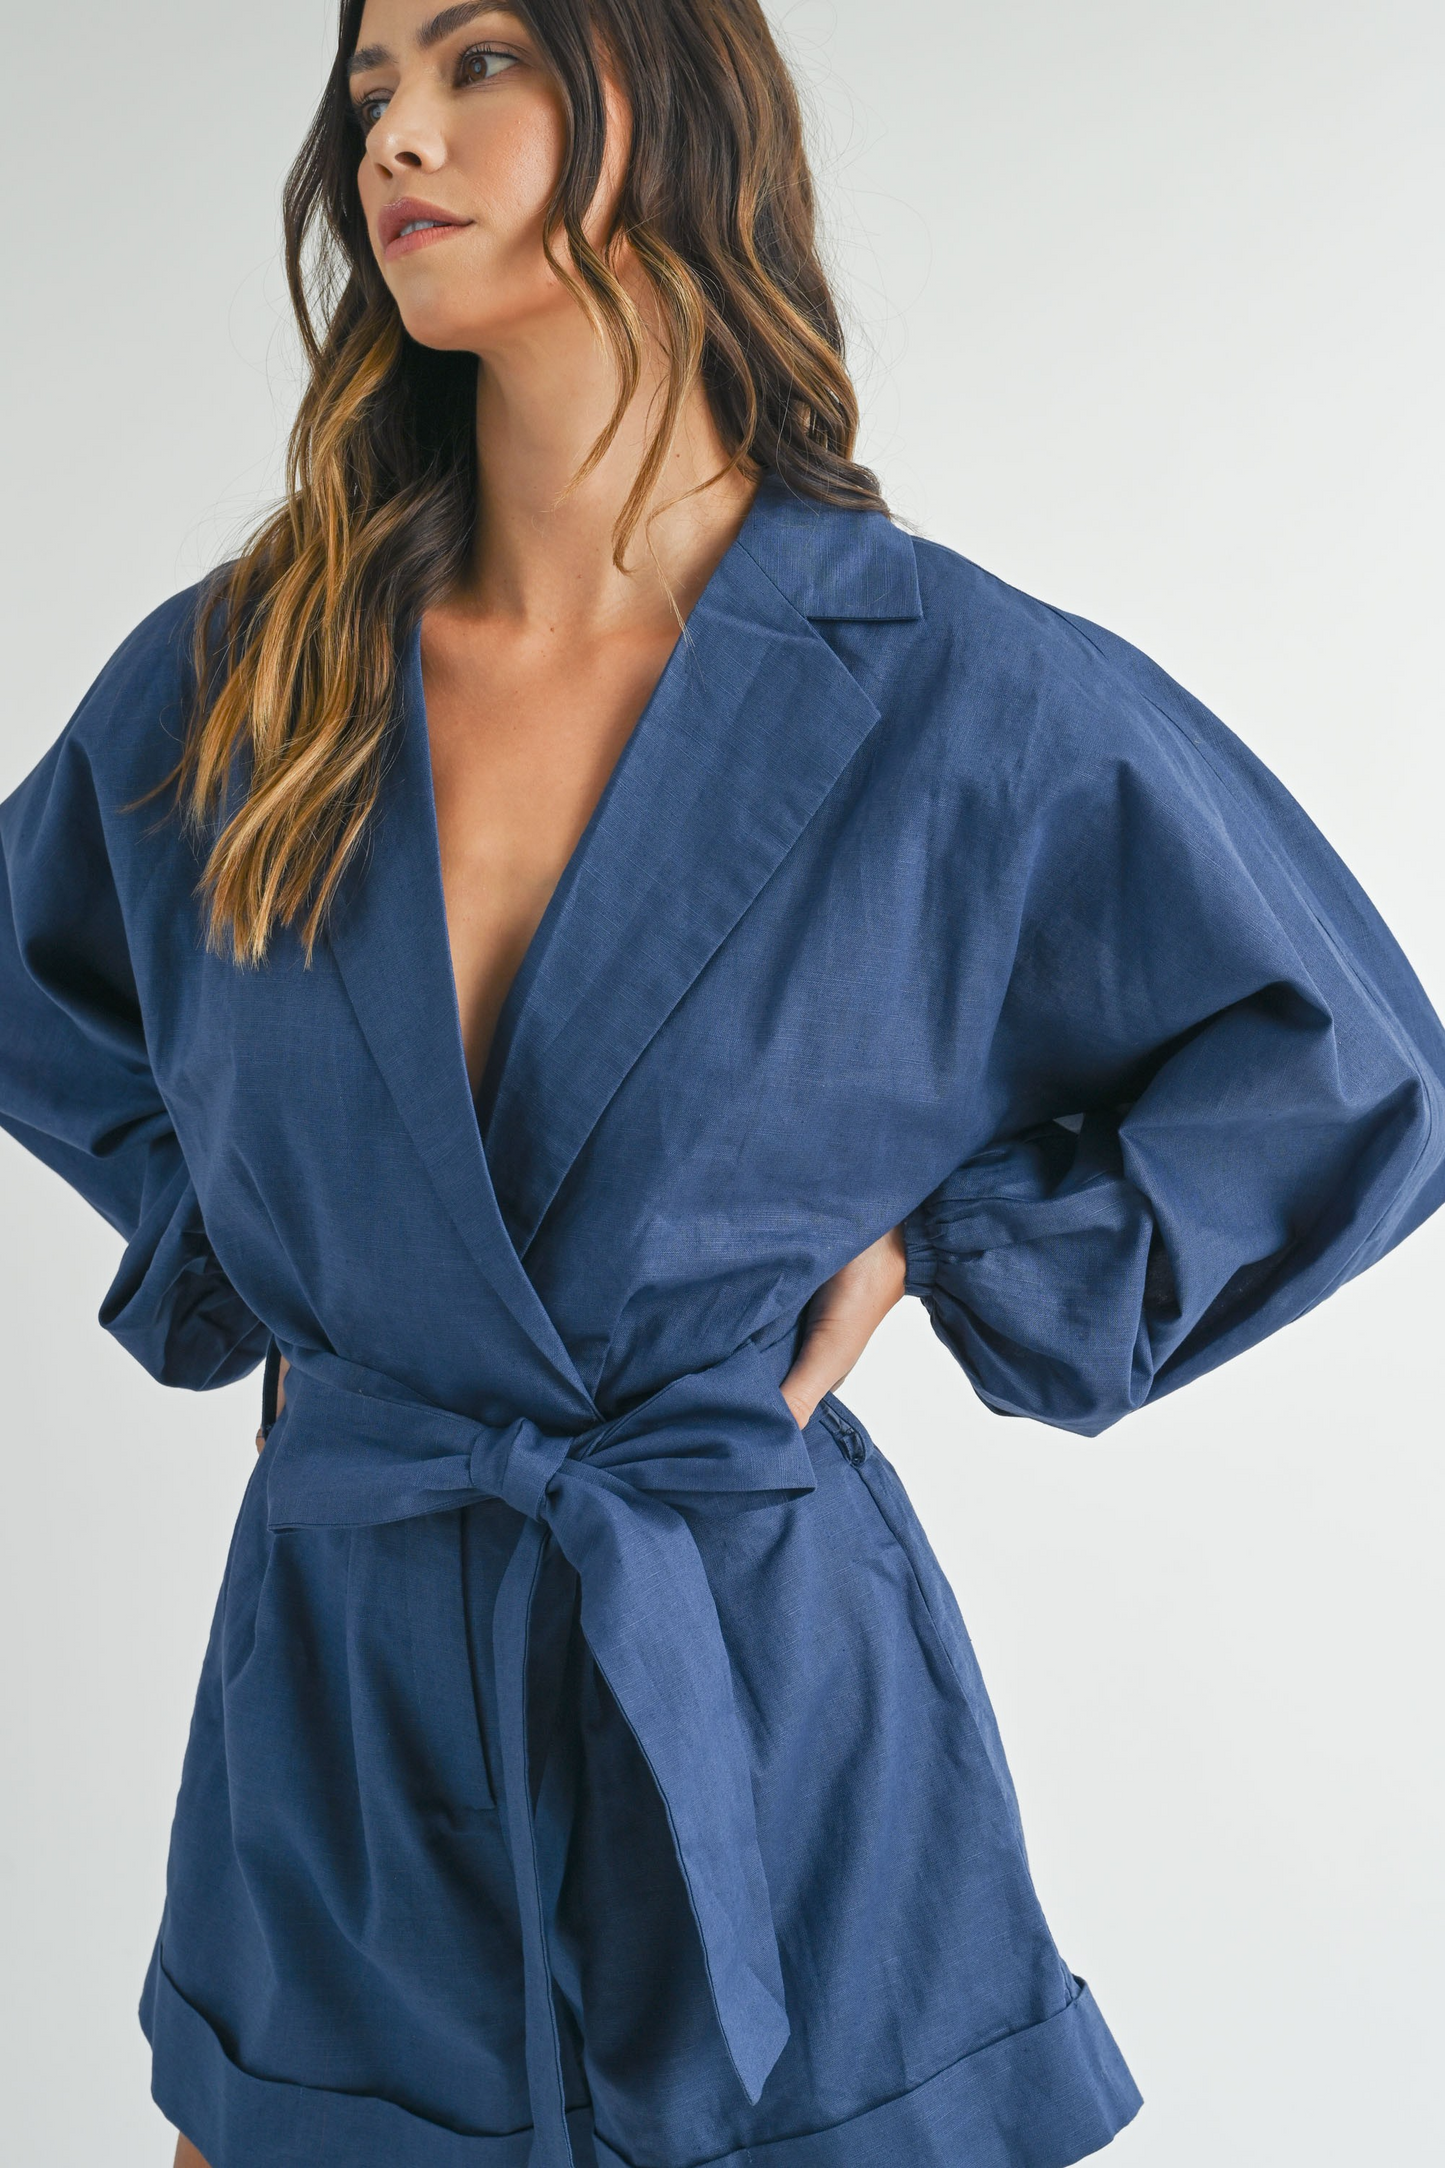 Waist Belted Jacket Style Collared Romper